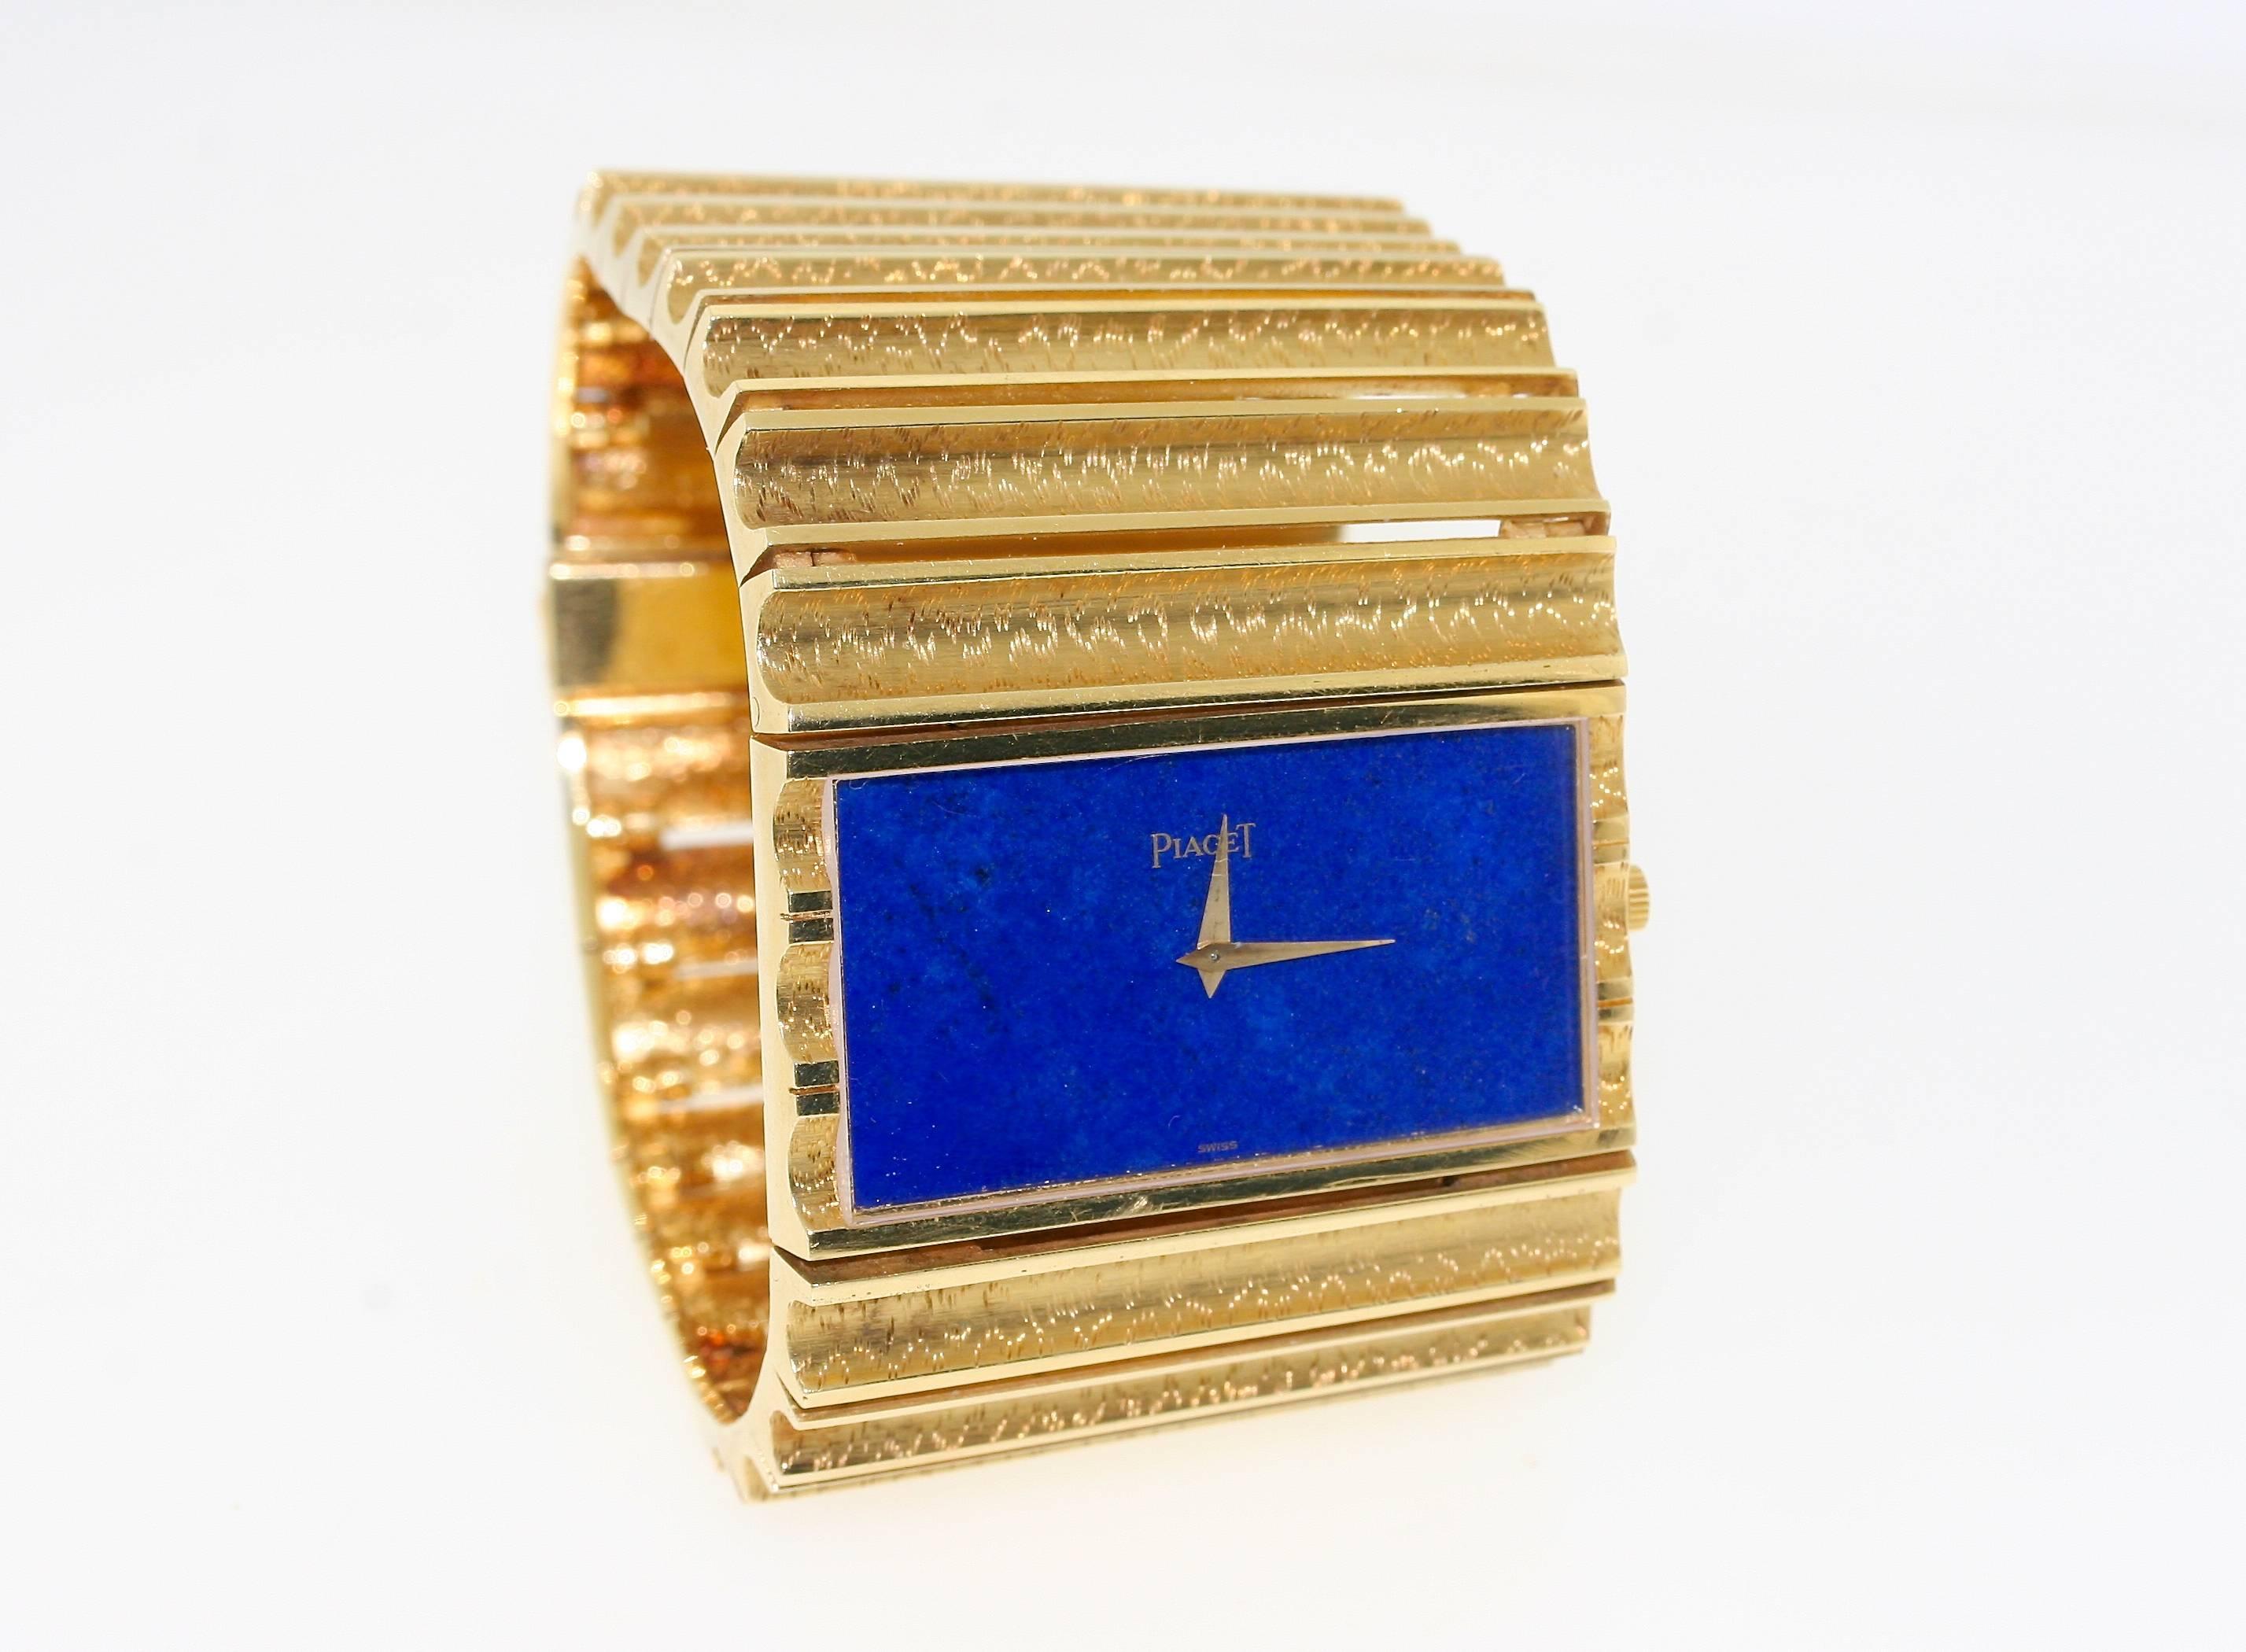 Piaget 18k gold bracelet watch designed as finely engraved, rectangular concave links articulated to bend to the shape of the wrist centering a rectangular lapis stone face. 1.75